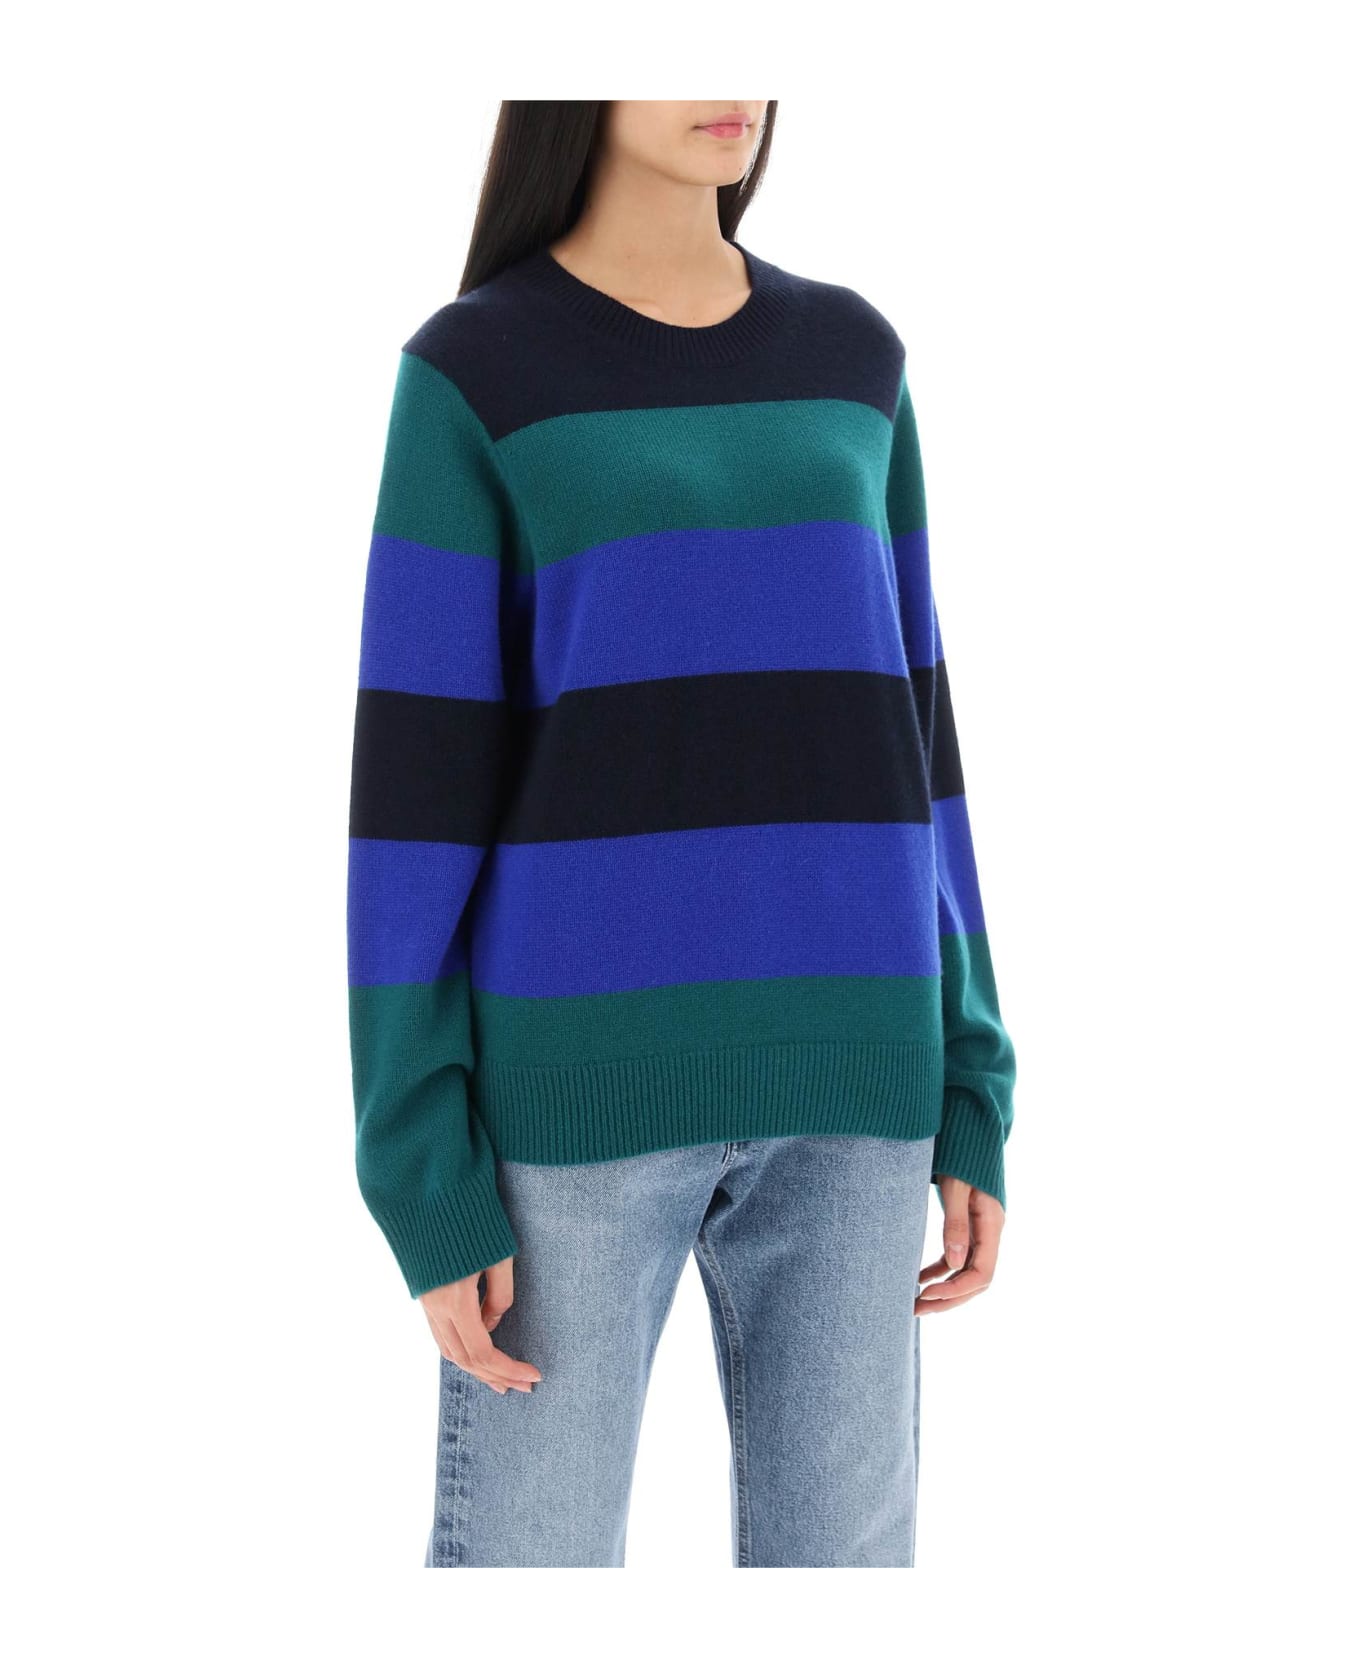 Guest in Residence Striped Cashmere Sweater - FOREST COBALT MIDNIGHT (Green)